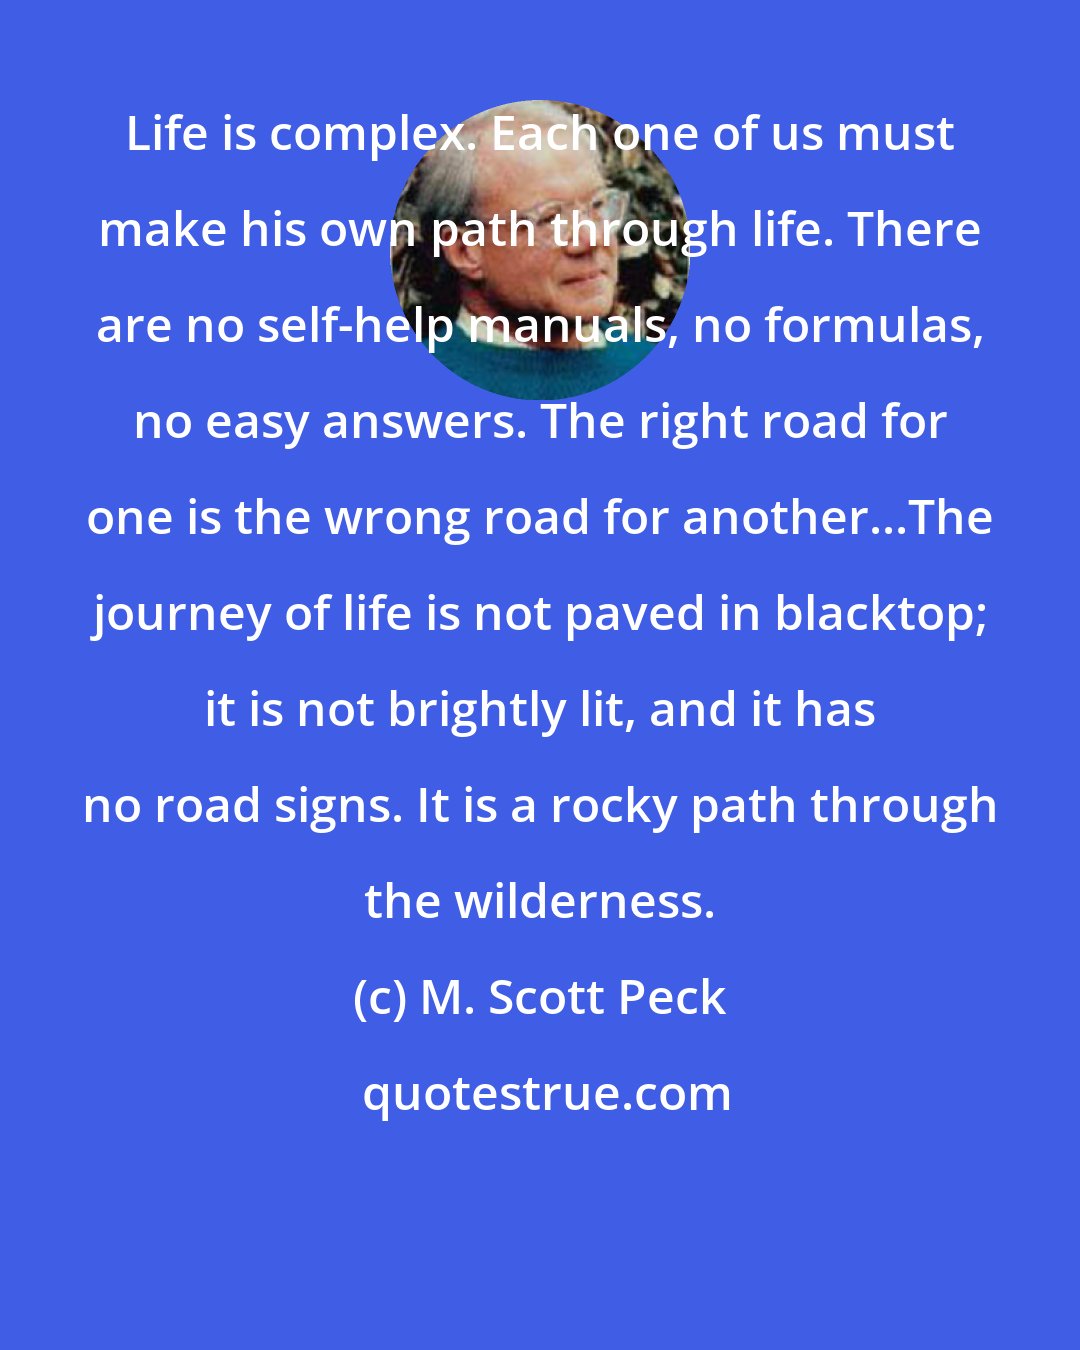 M. Scott Peck: Life is complex. Each one of us must make his own path through life. There are no self-help manuals, no formulas, no easy answers. The right road for one is the wrong road for another...The journey of life is not paved in blacktop; it is not brightly lit, and it has no road signs. It is a rocky path through the wilderness.